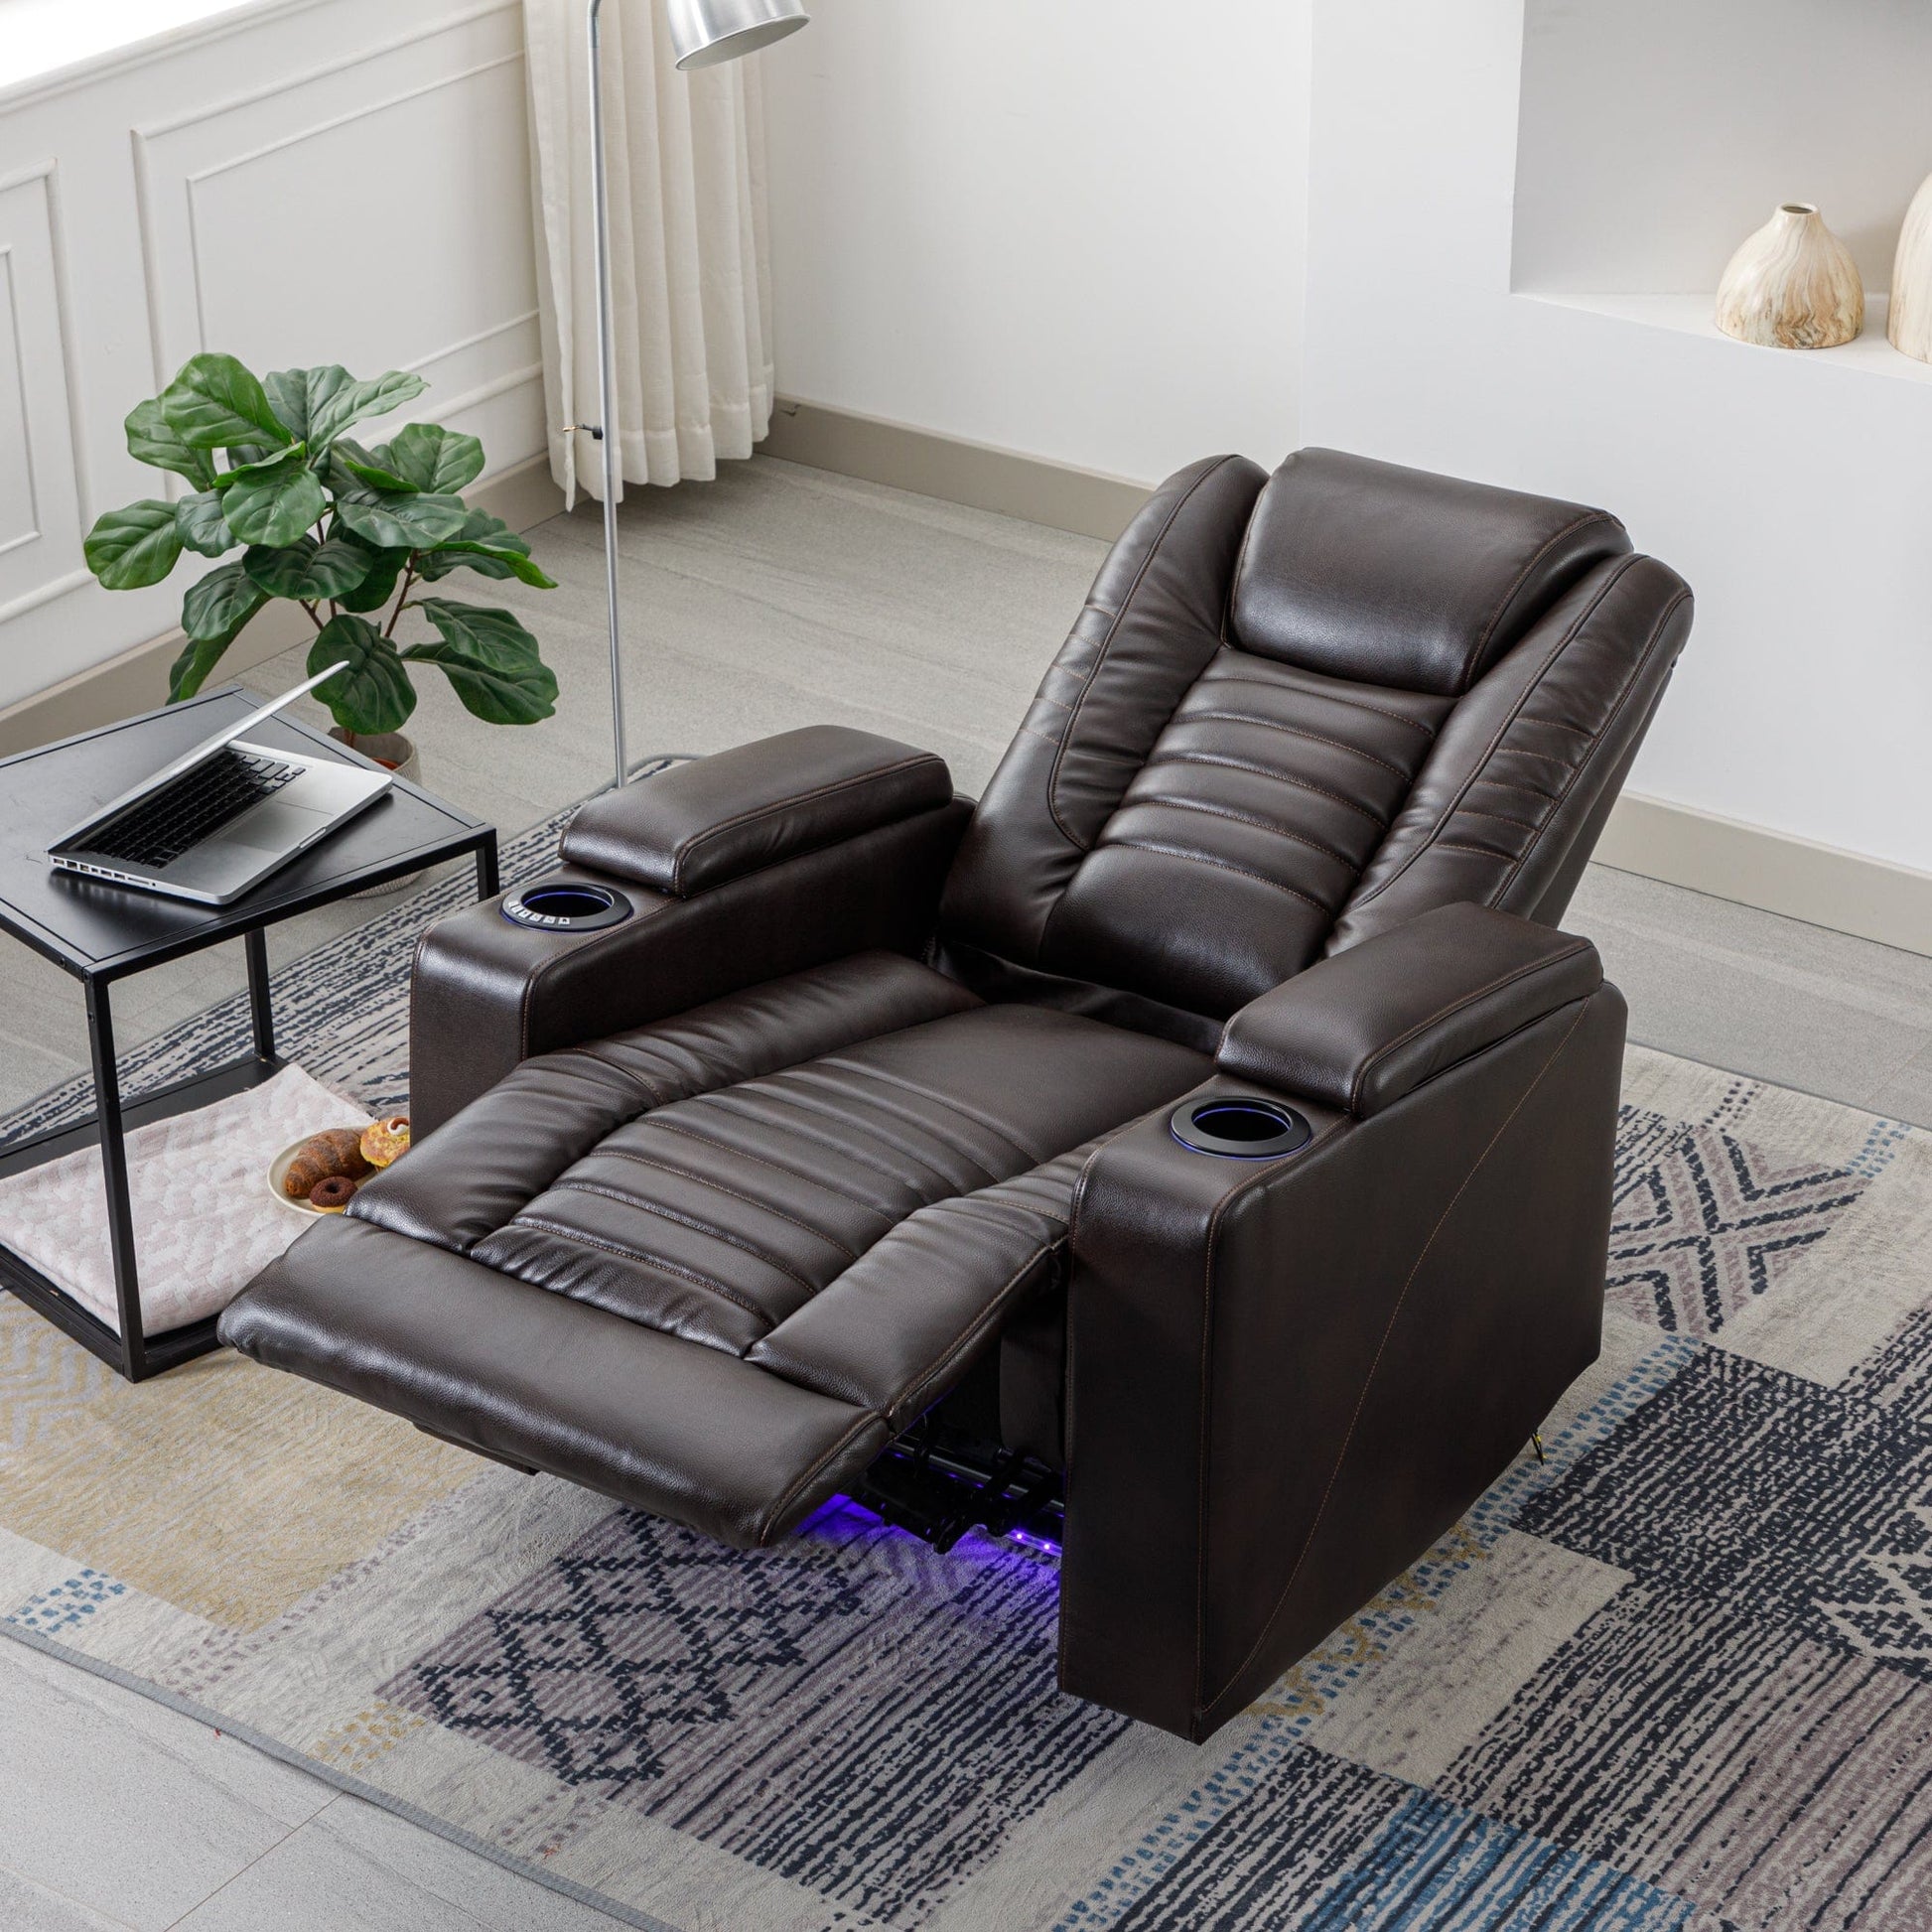 1st Choice Furniture Direct Power Motion Recliner 1st Choice Modern Power Motion Adjustable Recliner in Brown Finish